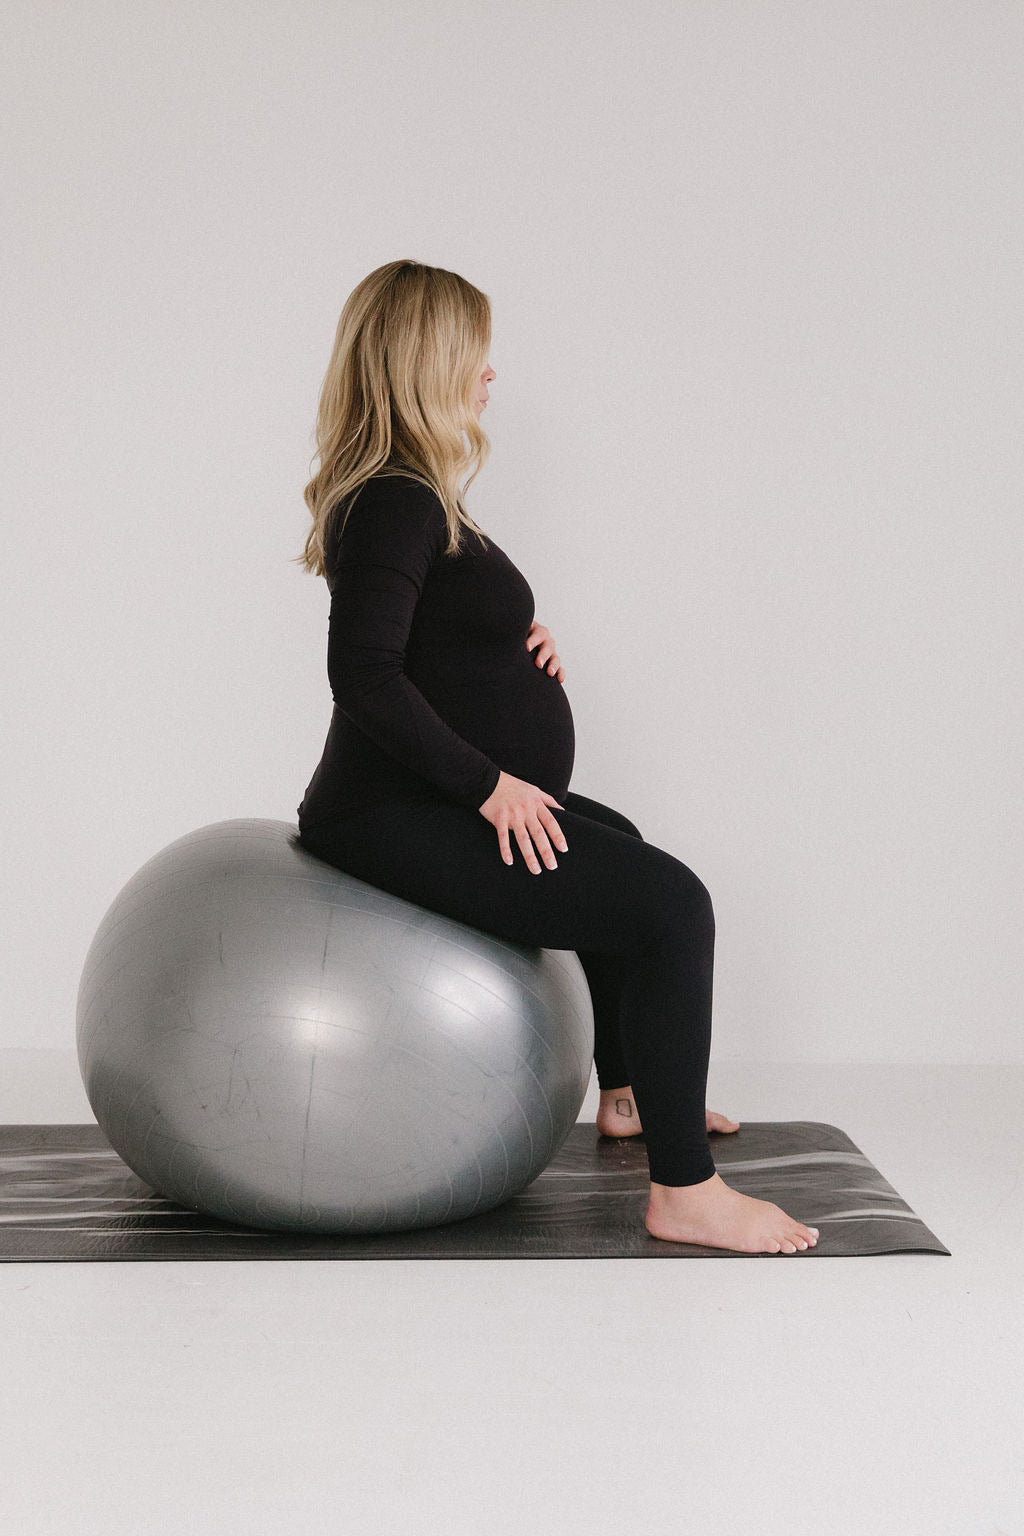 BalanceFrom Exercise Ball//Birthing Ball - Chiro For Moms